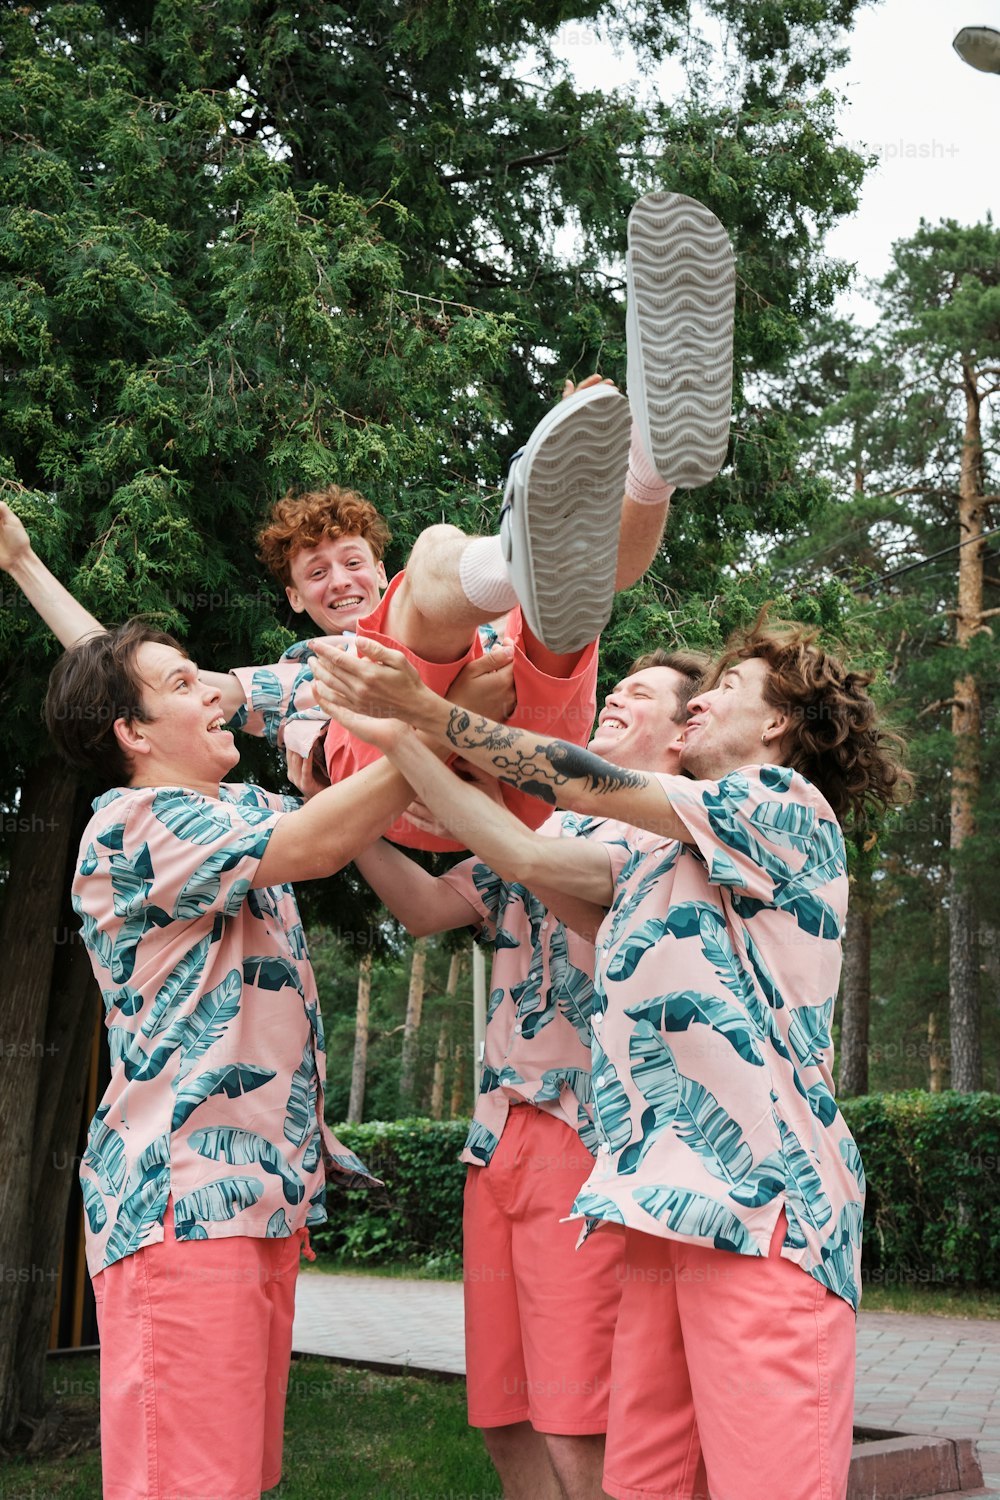 a group of young men standing next to each other holding a frisbee